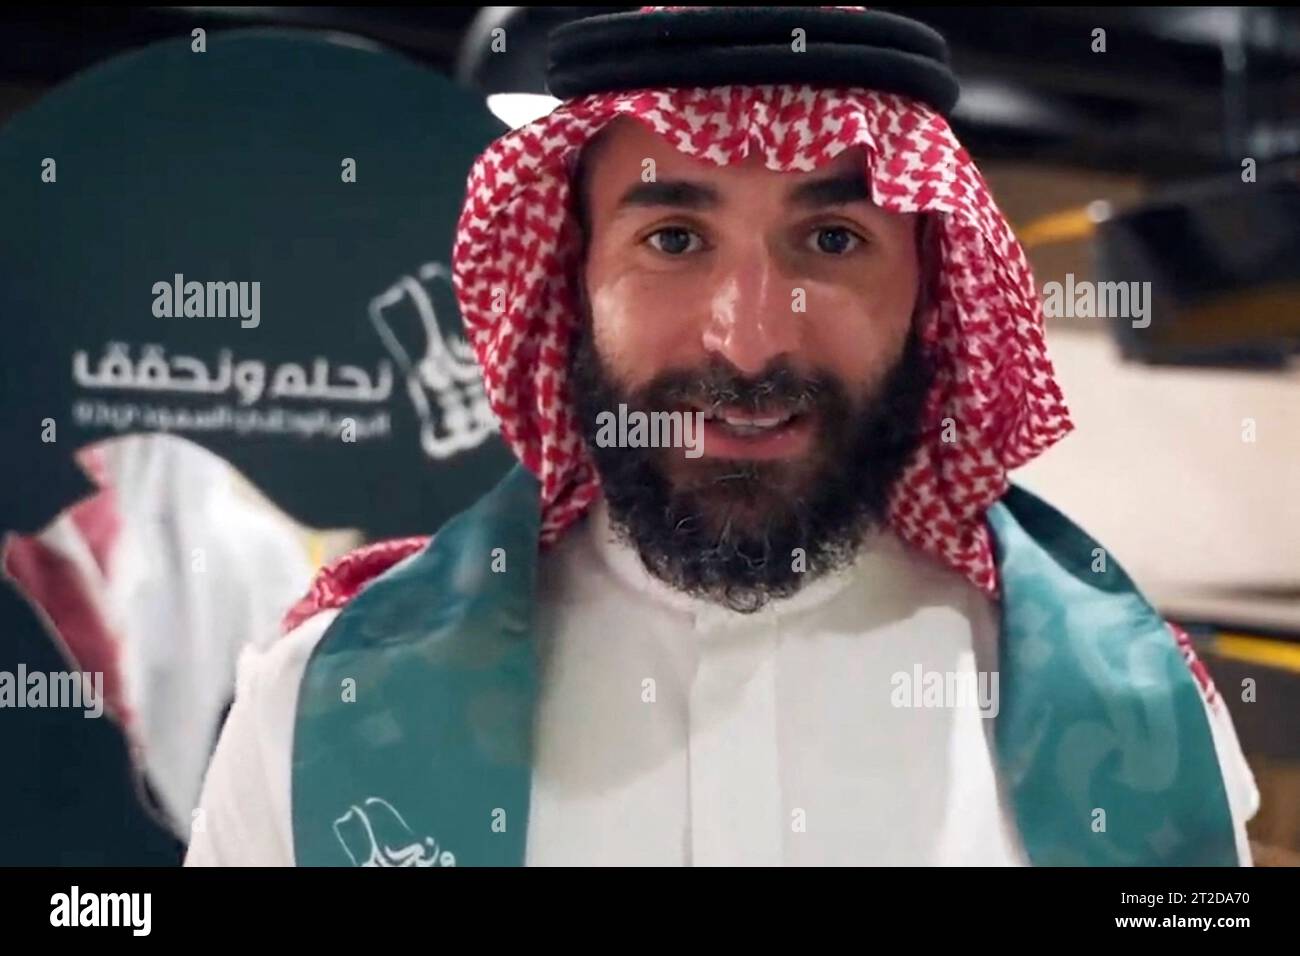 File photo - French football player Karim Benzema is seen dancing the traditional ‘aardha’, sometimes also known as the sword dance’, as he celebrates with his club ‘Al-Ittihad’, the Saudi National Day (September 23), in Jeddah, Kingdom of Saudi Arabia, on September 27, 2023. Benzema is wearing traditional Saudi clothes : a ghutra or keffieh on his head, a white dishdasha or thobe. 2022 Ballon d’Or winner Karim Benzema finds himself mired in political controversy amid the ongoing Israel-Hamas war. Speaking to French outlet CNews on Monday, French Interior Minister Gérald Darmanin accused Benze Stock Photo